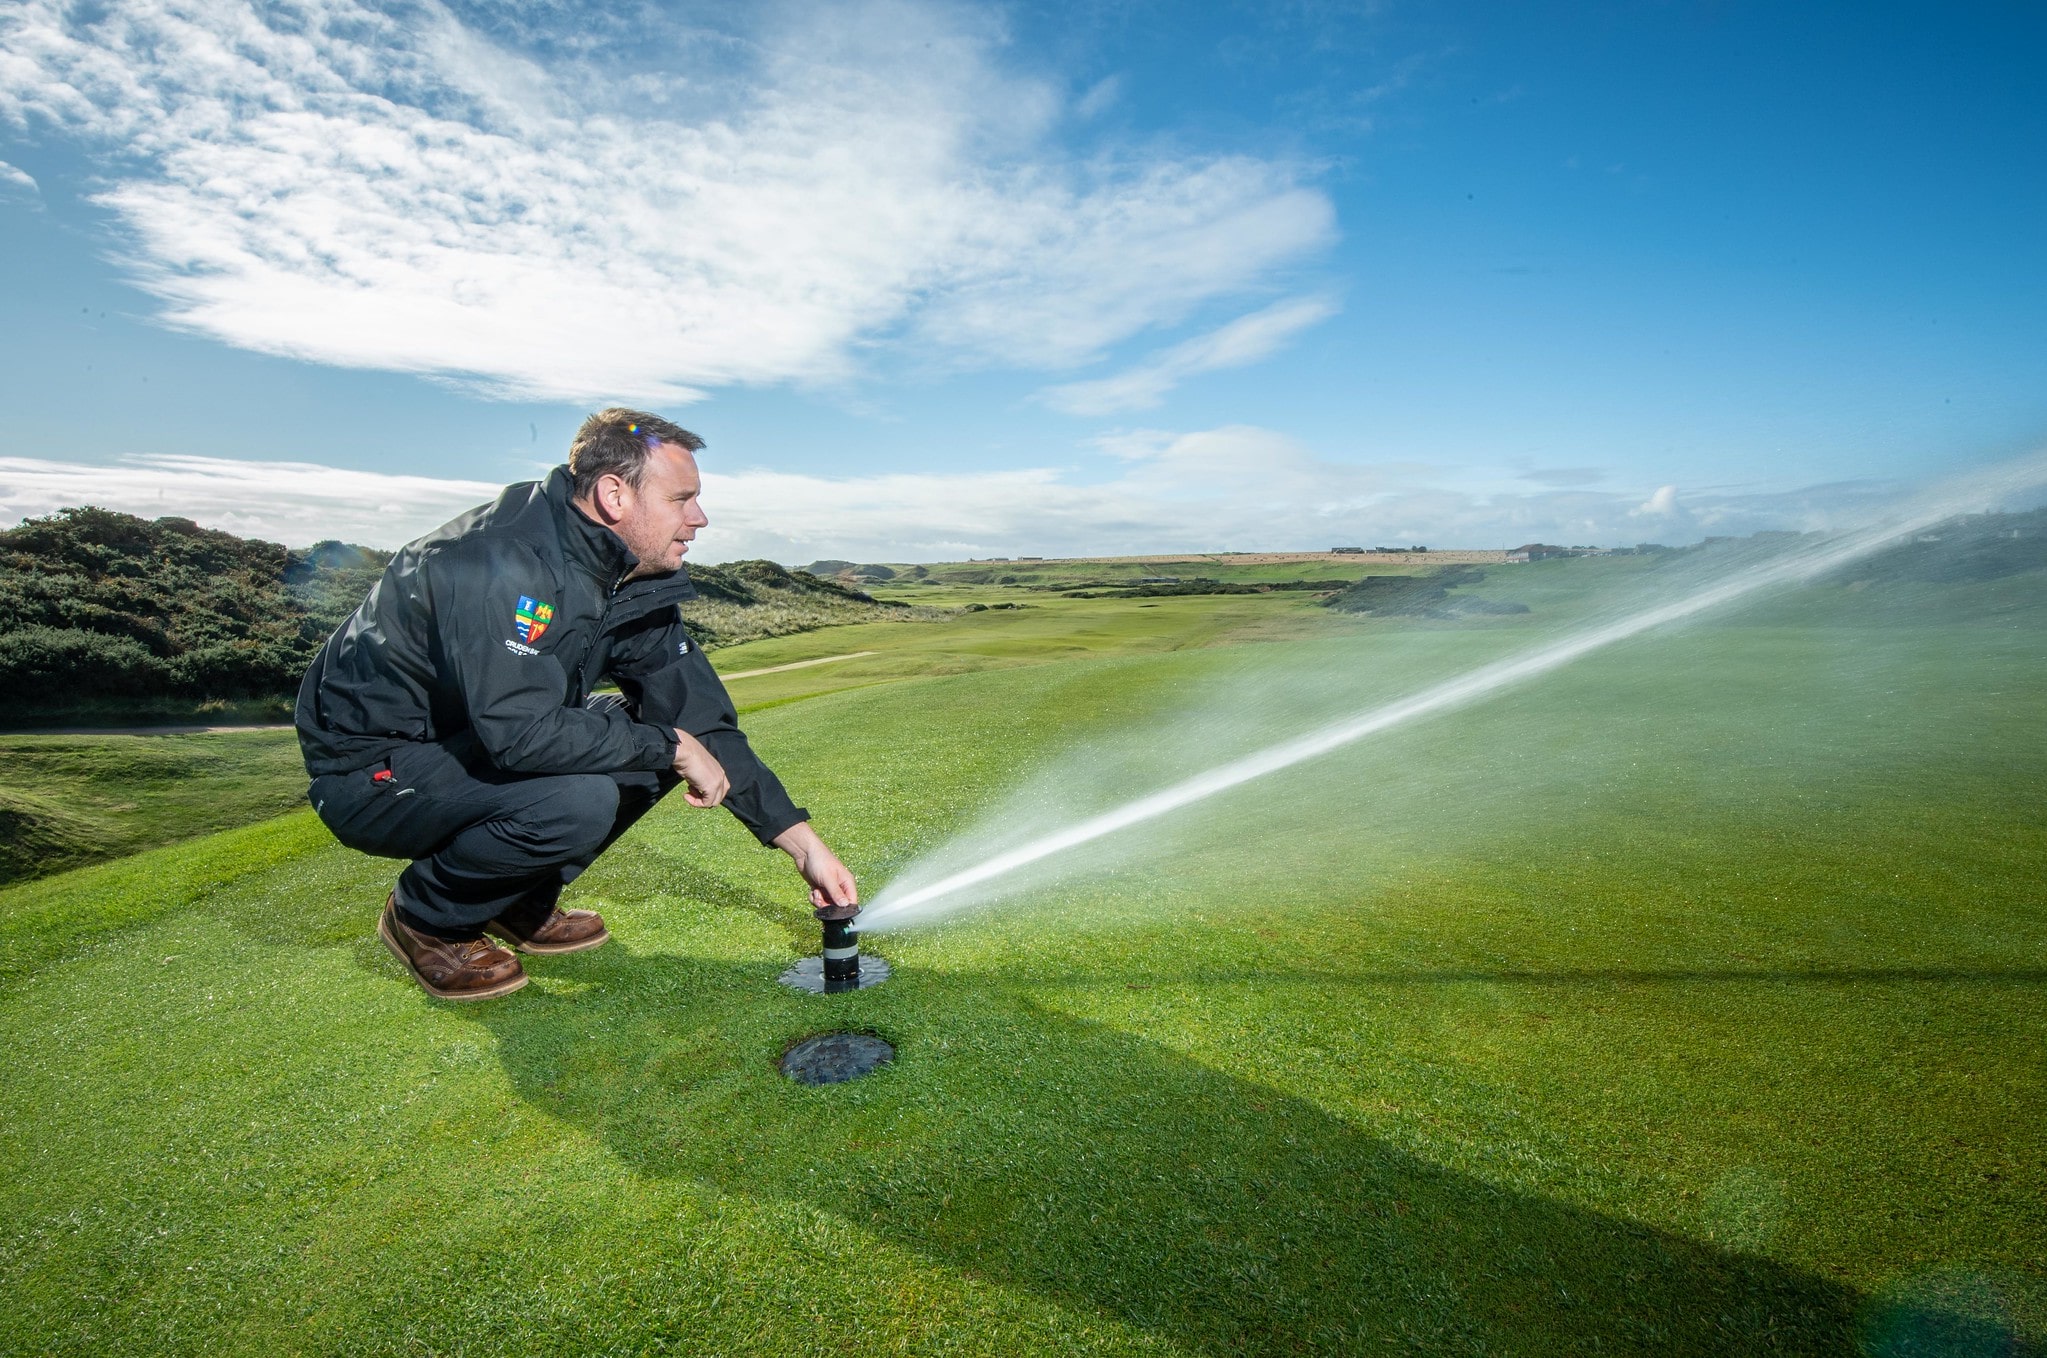 A Cruden Bay Golf Club greenkeeper adjusts the positioning of a Toro Irrigation sprinkler in the turf.